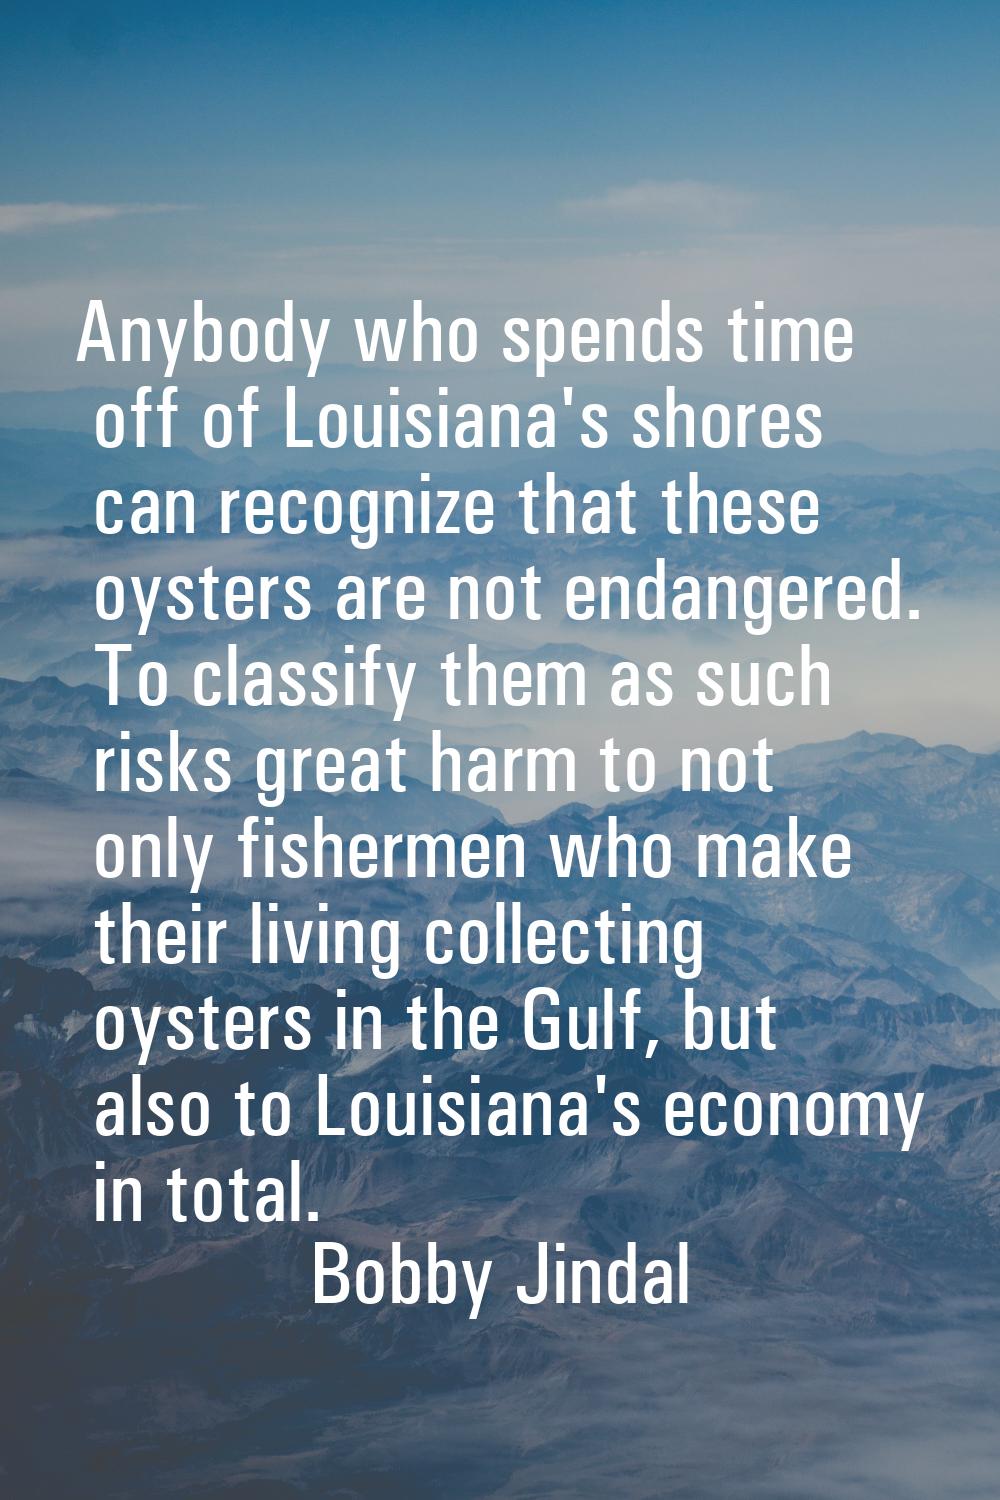 Anybody who spends time off of Louisiana's shores can recognize that these oysters are not endanger